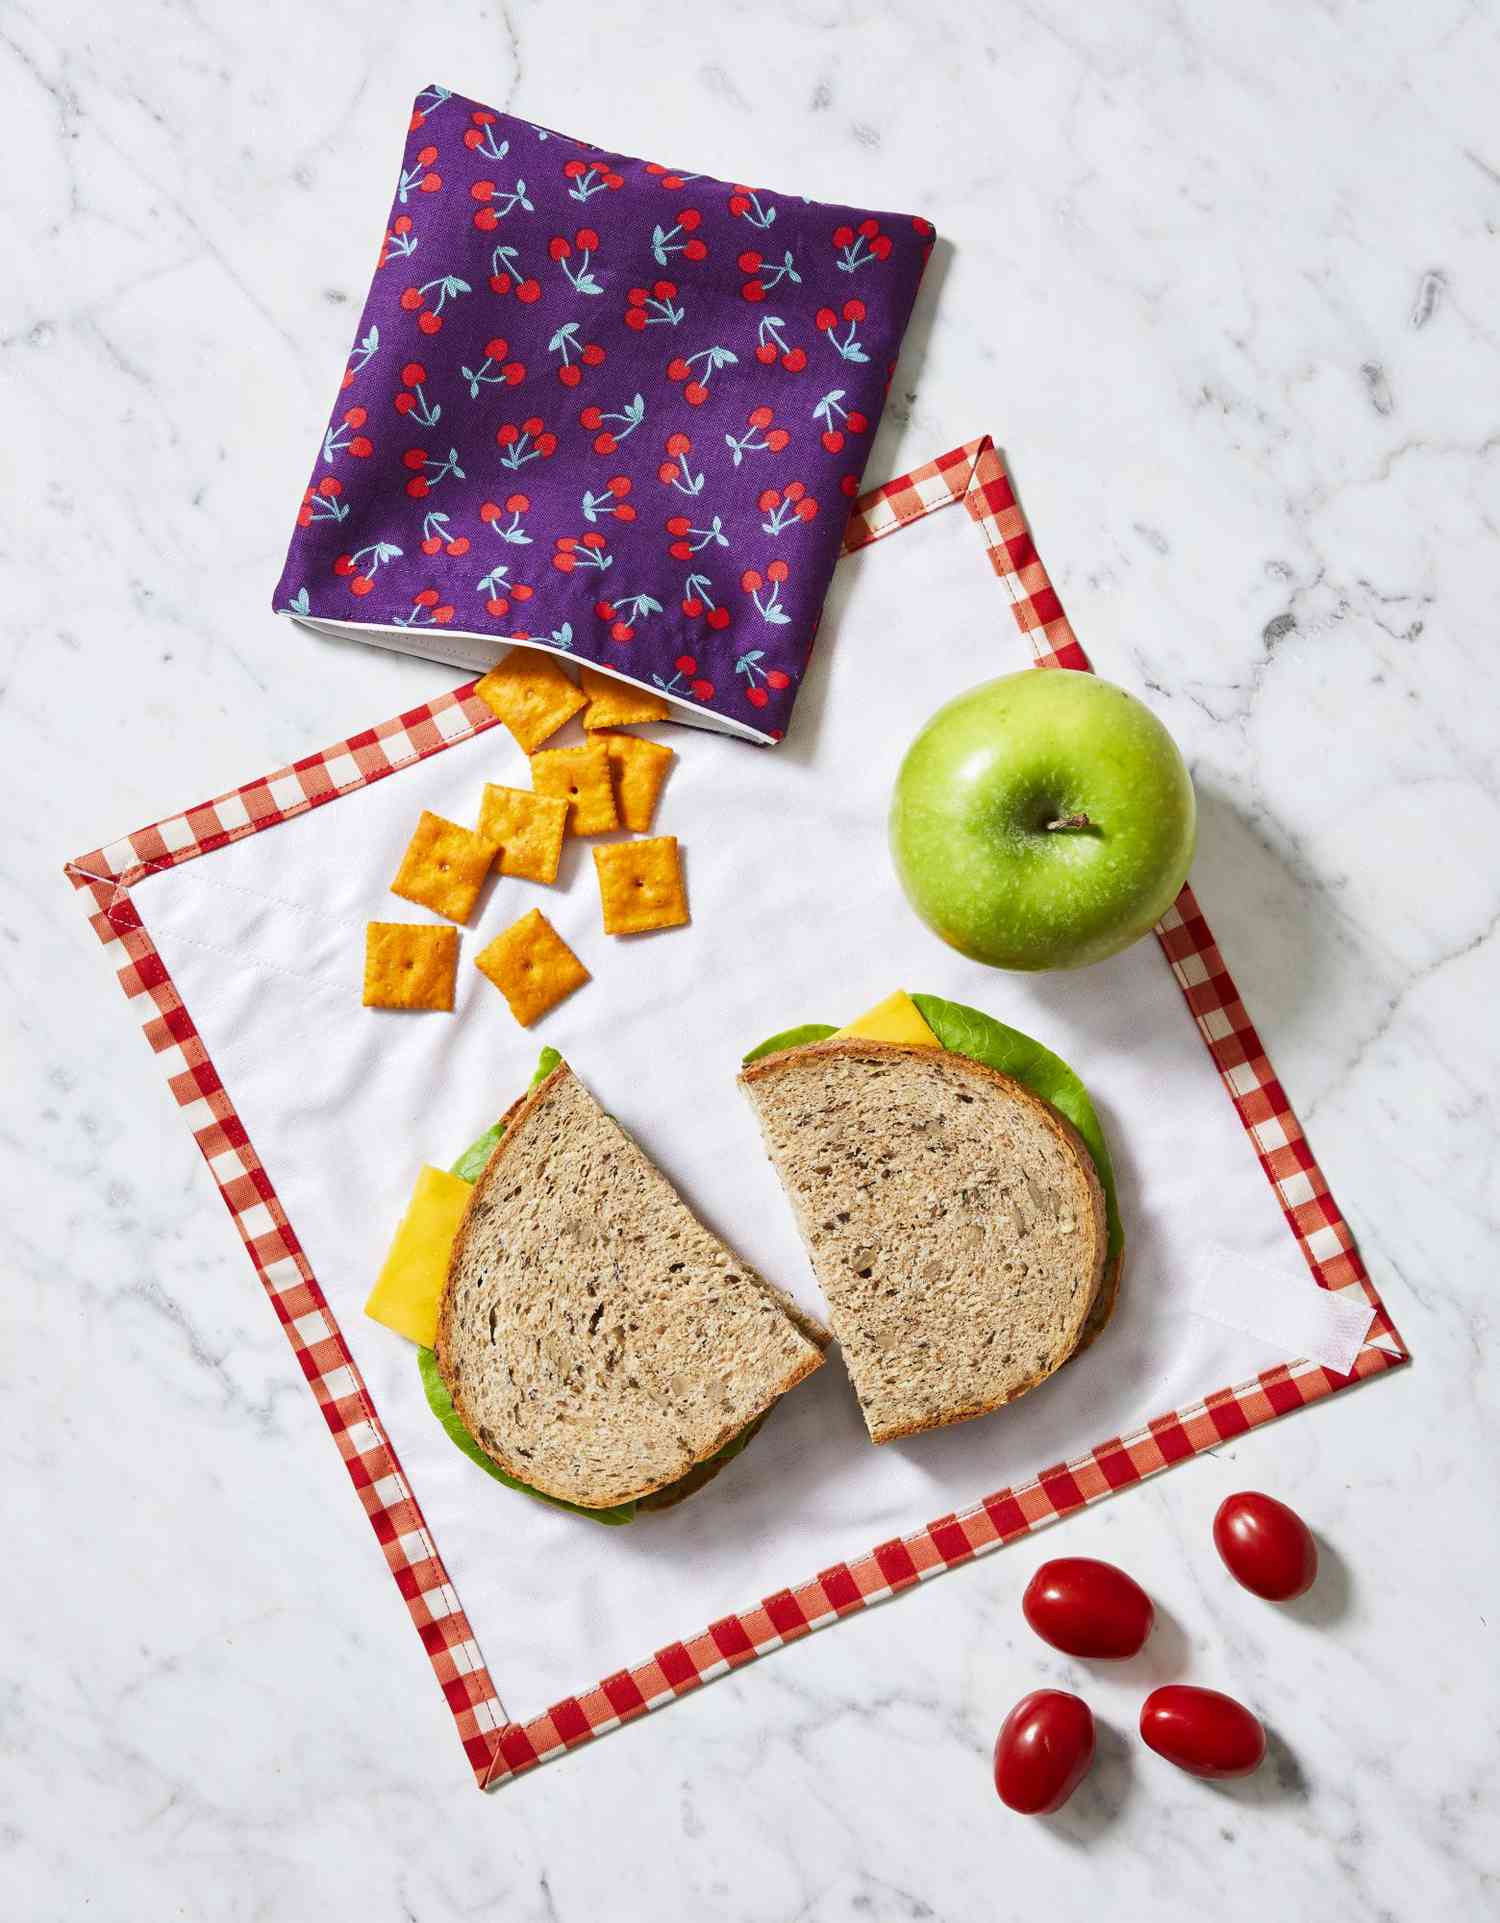 Fabric snack bag and sandwich wrap open with a sandwich on it